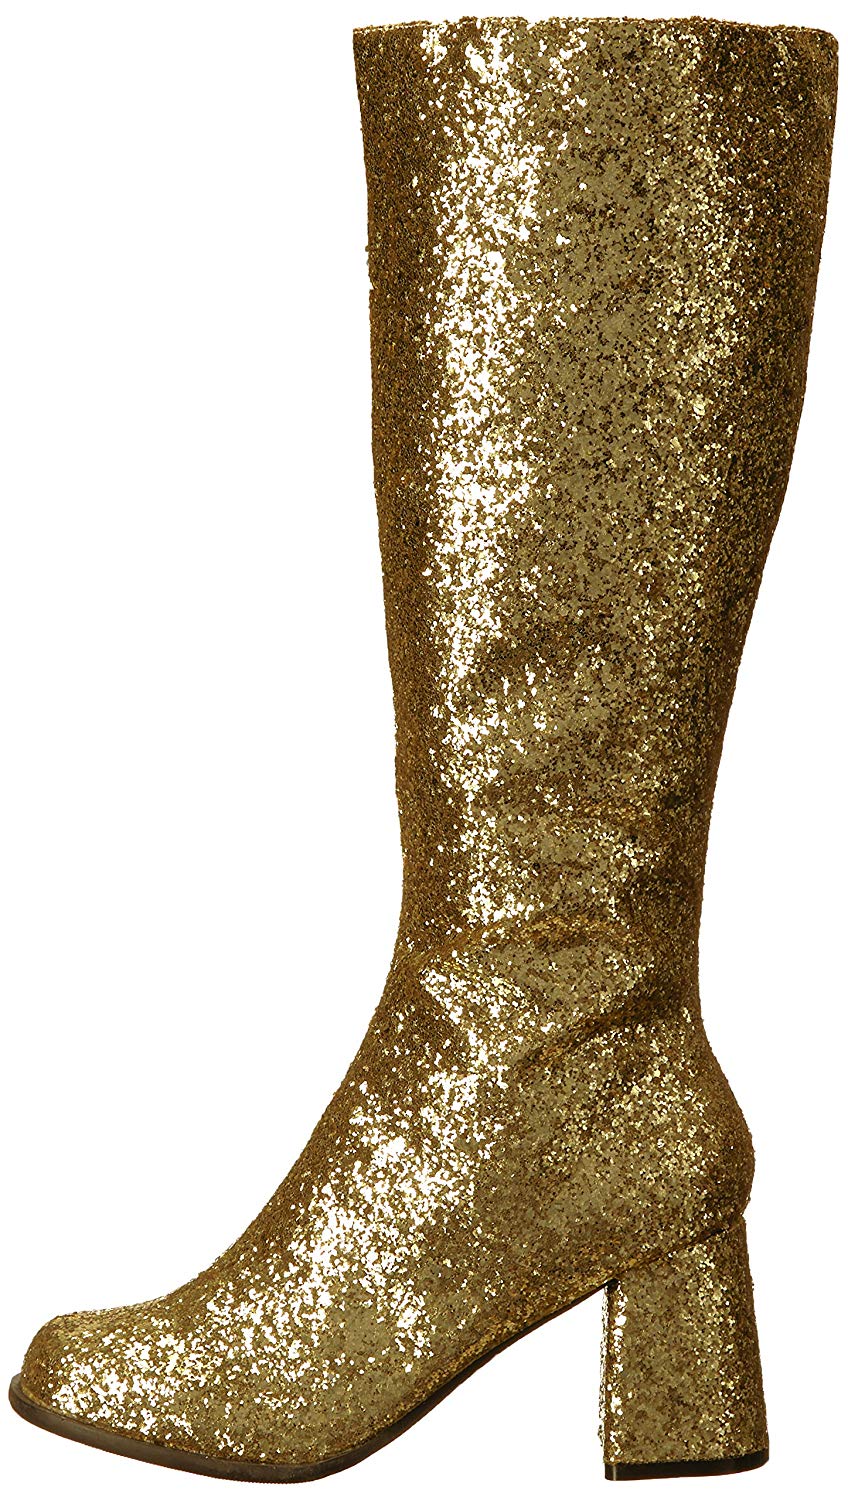 Ellie Shoes Womens Gogo-g Almond Toe Knee High Fashion Boots, Gold ...